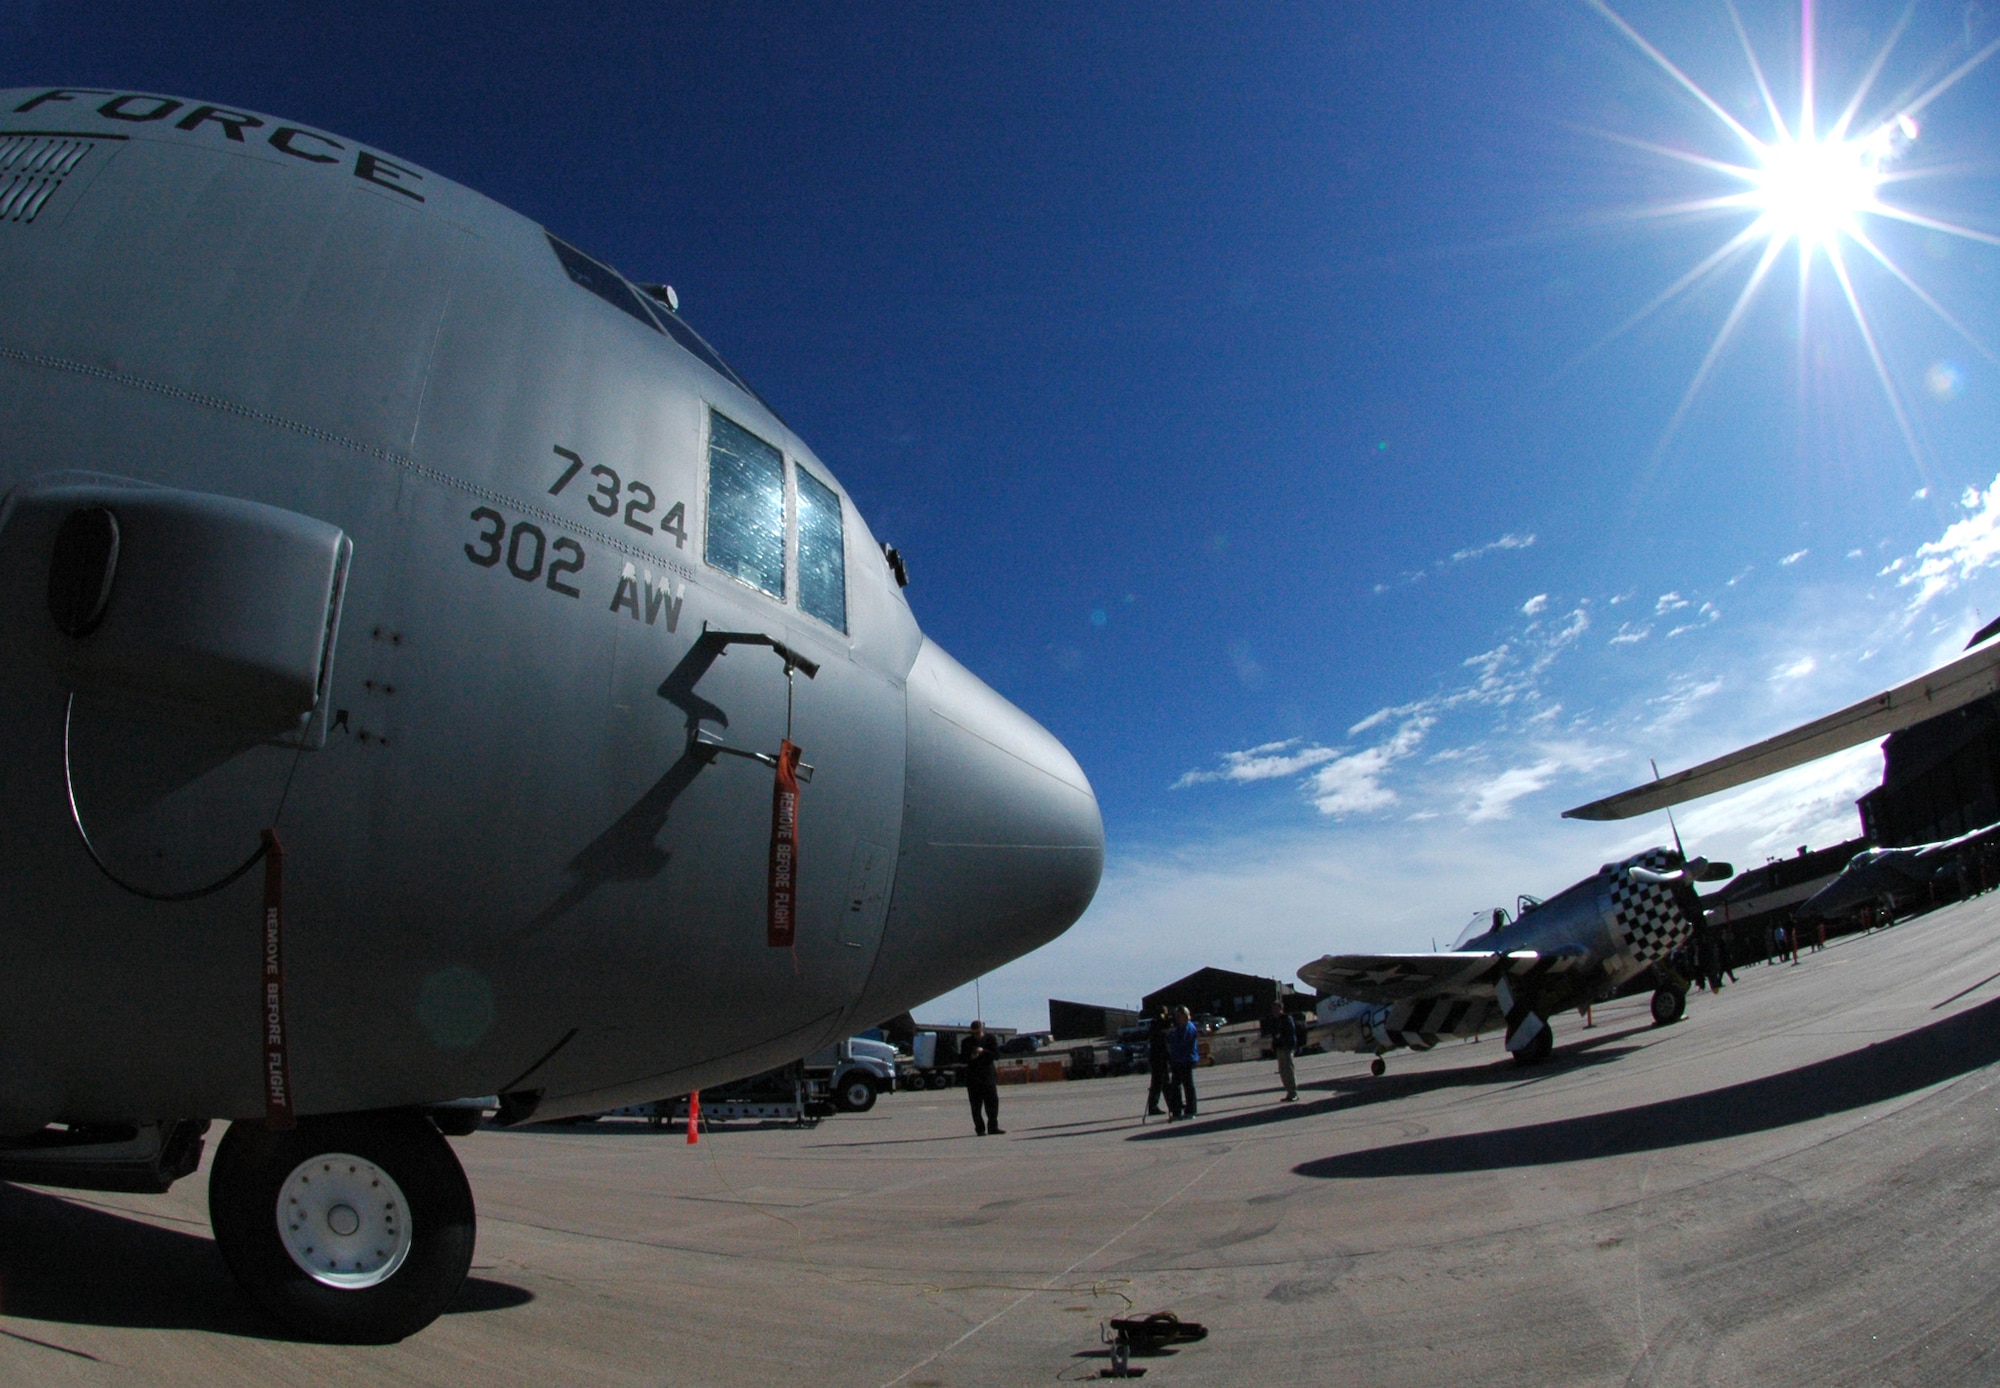 Media from the Colorado Springs, Colo., area capture footage May 19 while a 302nd Airlift Wing-assigned C-130 Hercules sits next to a World War II-era P-47 Thunderbolt (right) at Peterson Air Force Base, Colo. The aircraft were joined by a B-25 Mitchell bomber, an F-15C Eagle, a Colorado Air National Guard F-16 Fighting Falcon and a Canadian CF-18 Hornet as part of a change of command ceremony for the North American Aerospace Defense Command and U.S. Northern Command organizations. The 302nd Airlift Wing is an Air Force Reserve Command-assigned unit. (U.S. Air Force photo/Staff Sgt. Stephen J. Collier)